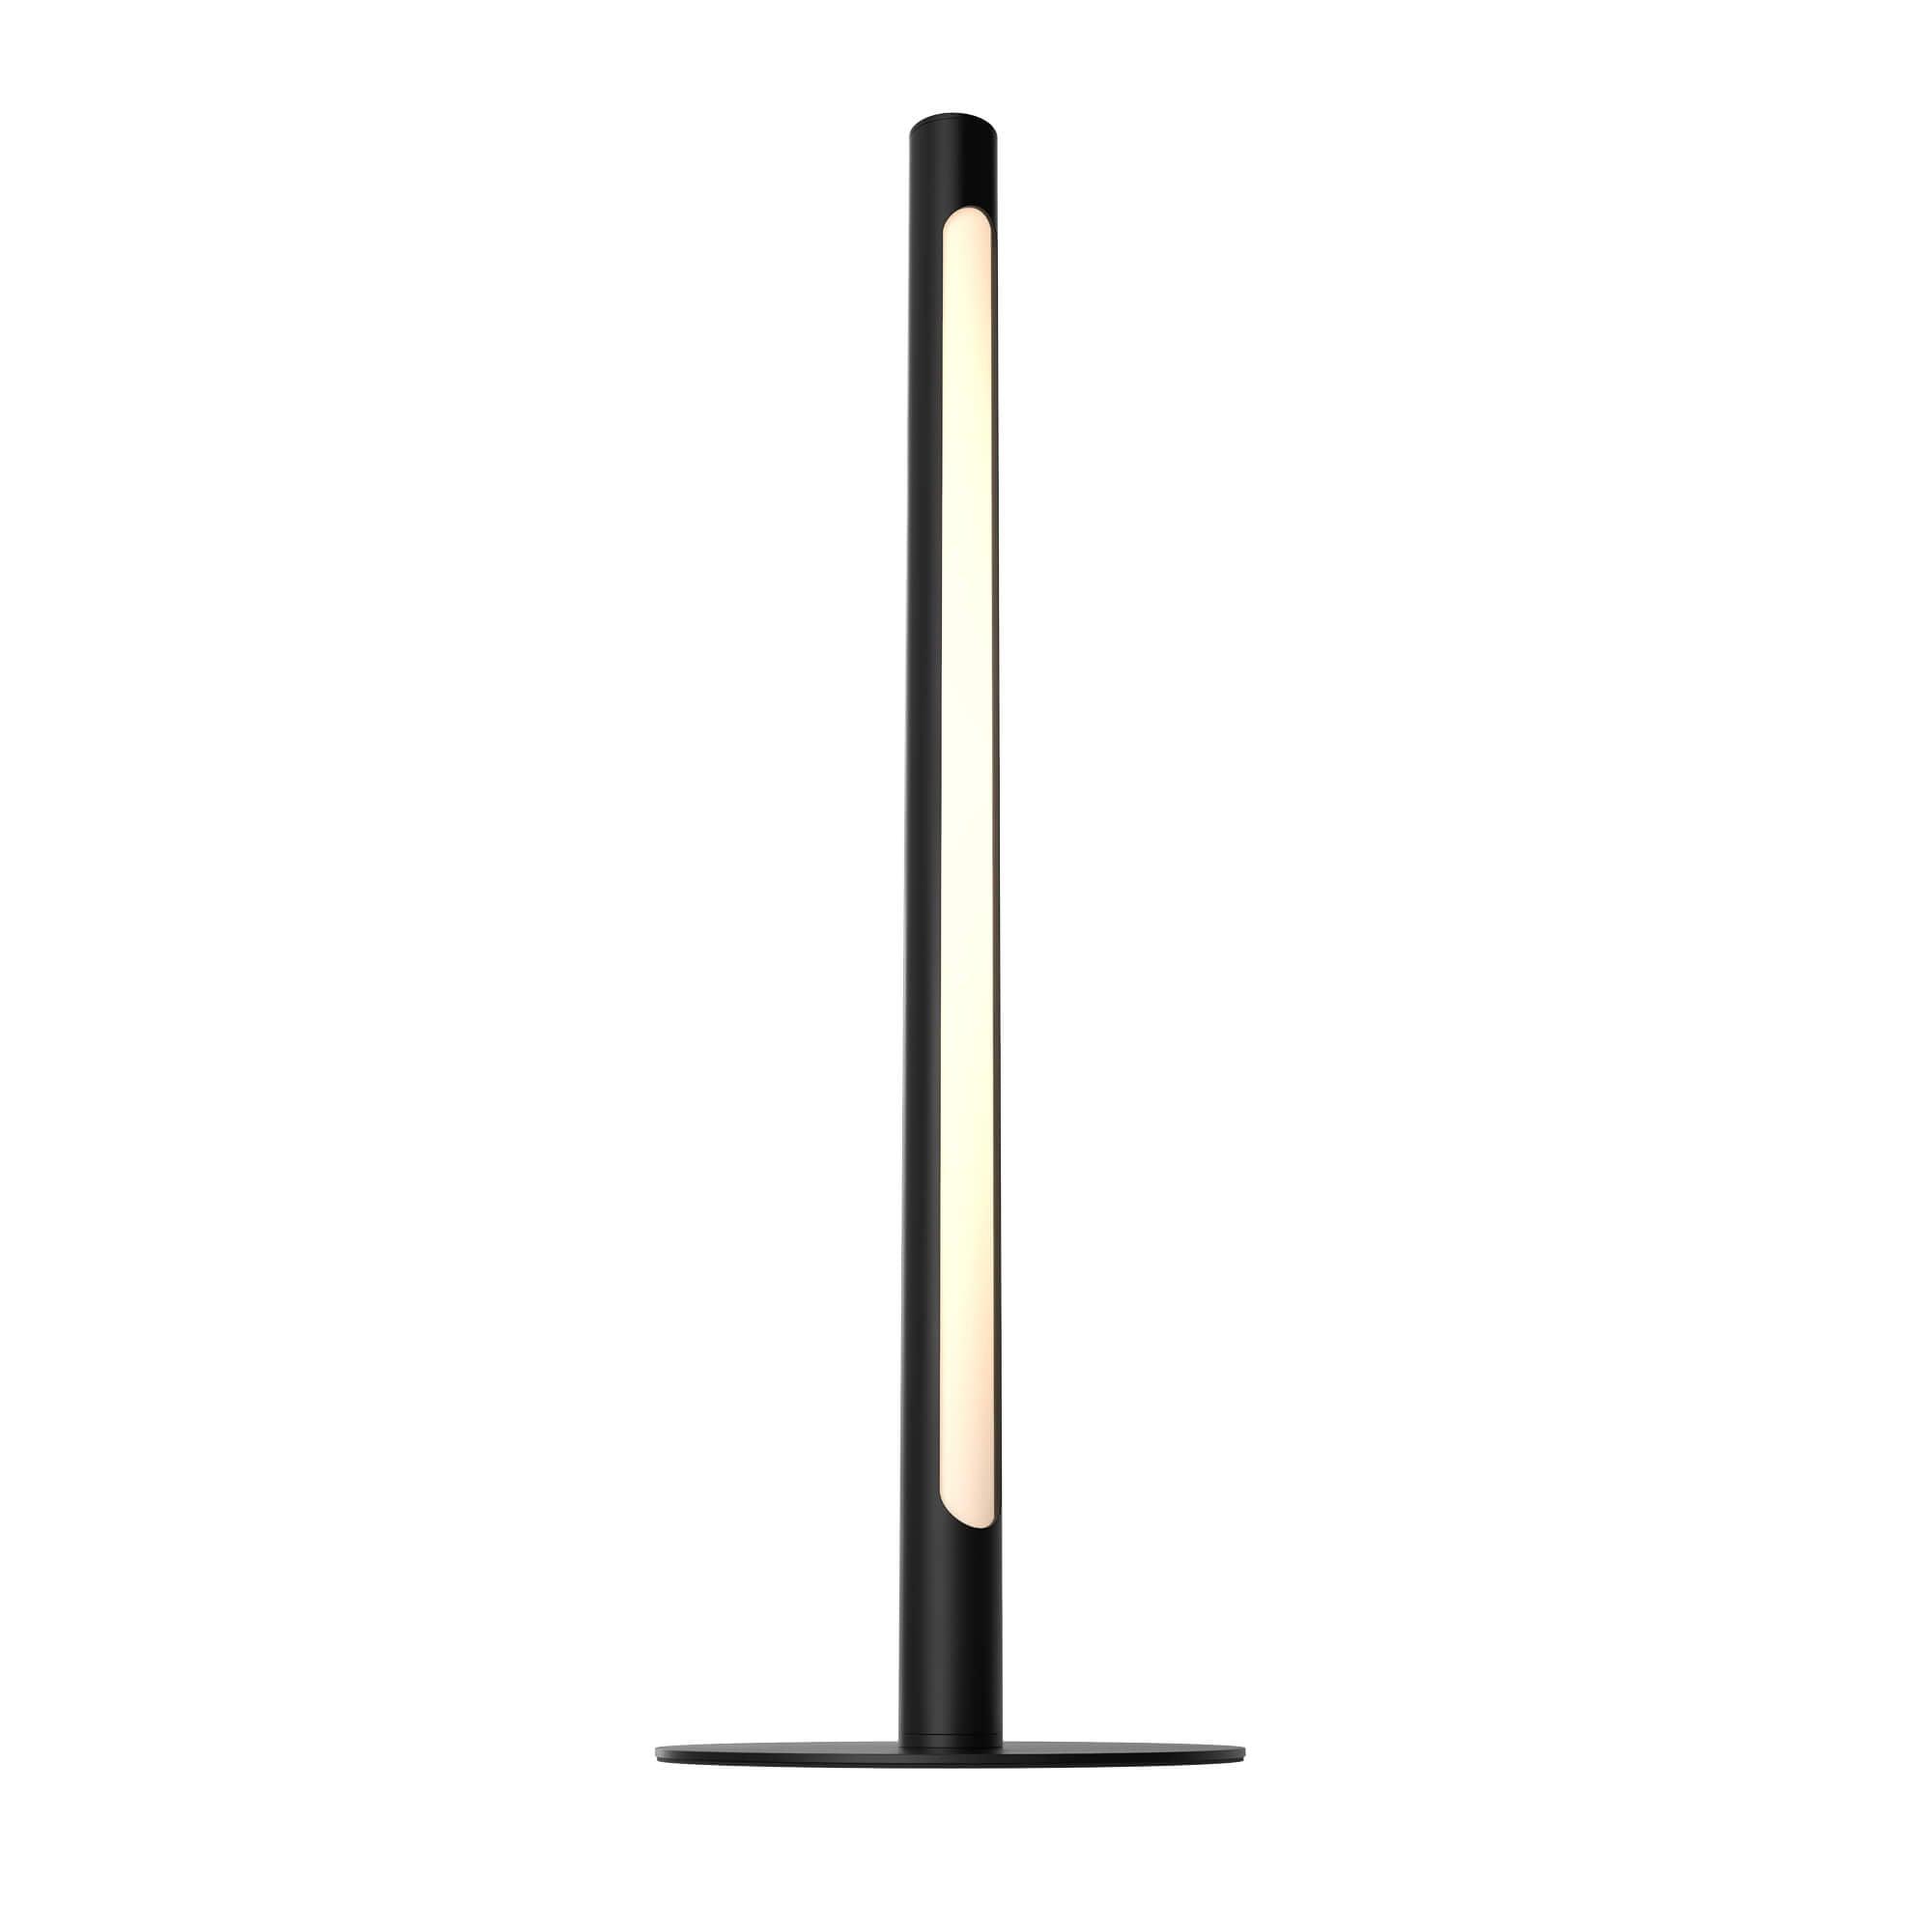 DALS Lighting - DALS Connect Smart Wi-Fi Digital Table Lamp - SM-STTL20-BK | Montreal Lighting & Hardware